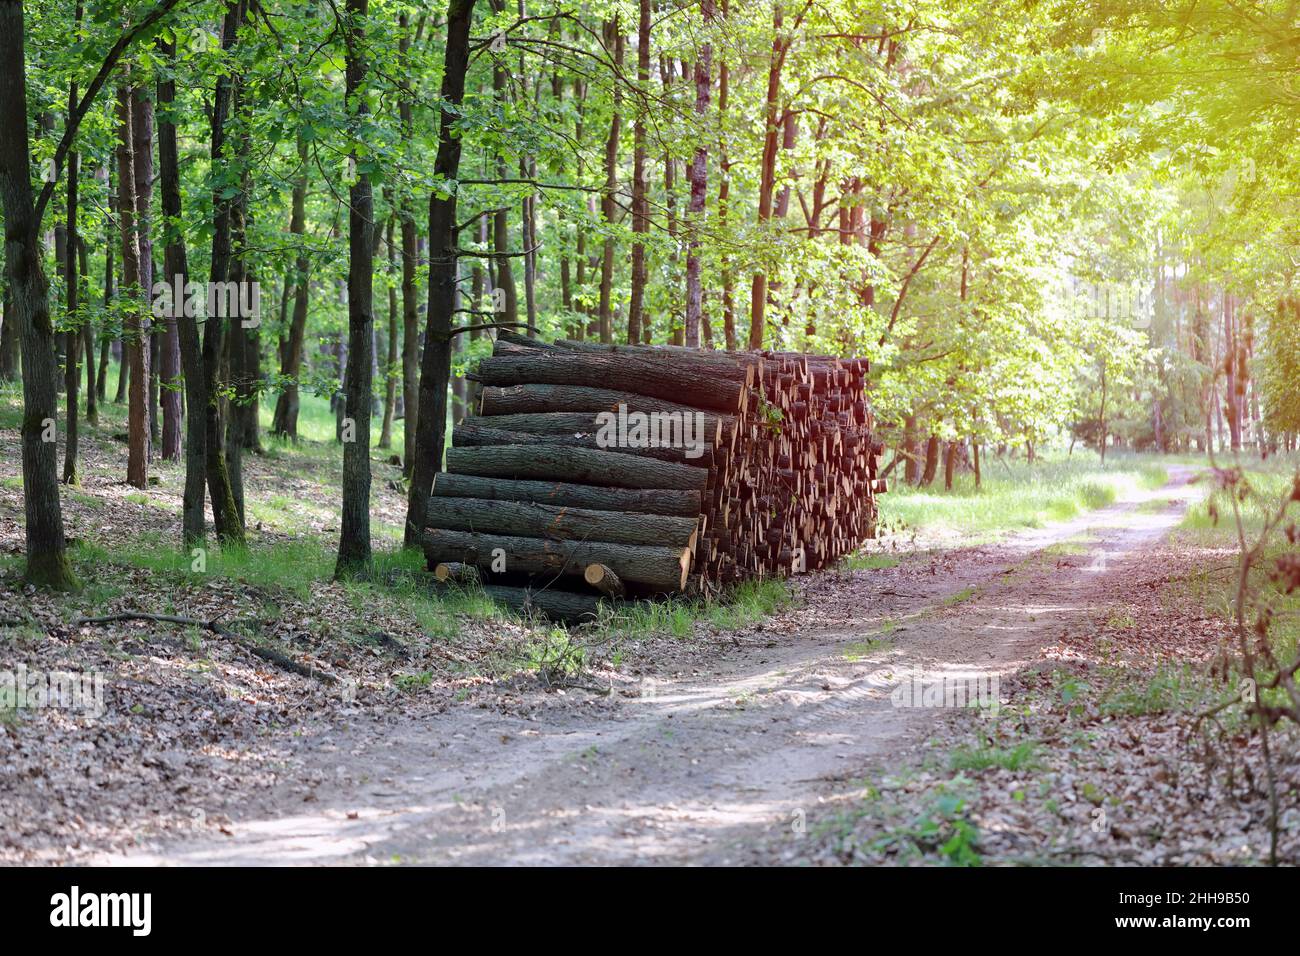 Tree logs in forest after clearing of plantation in forest. Raw timber from felling site. Cut trees logs. Stacks of cut wood. Stock Photo